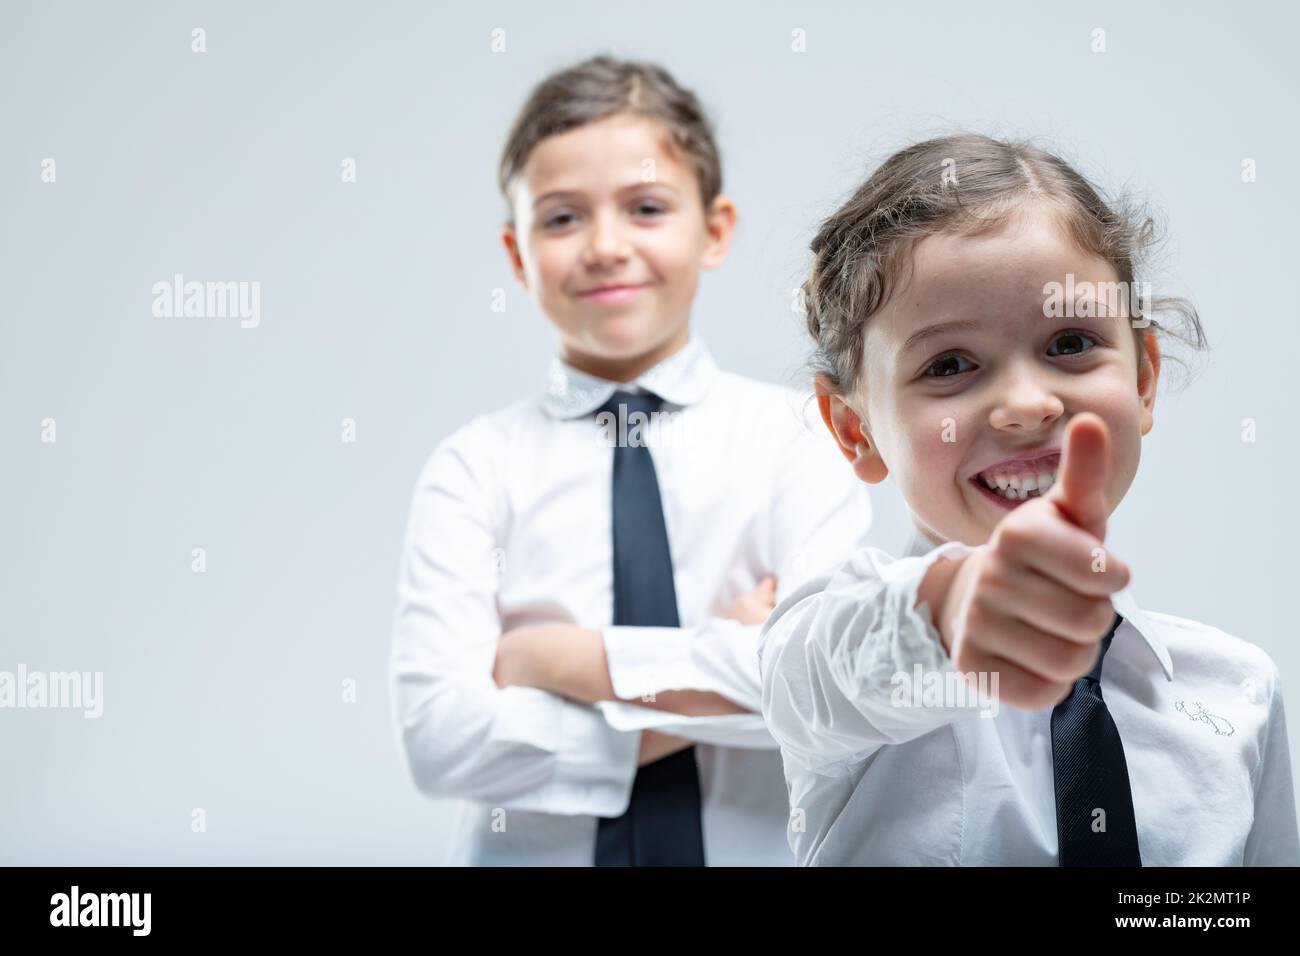 Happy motivated little girl giving a thumbs up Stock Photo